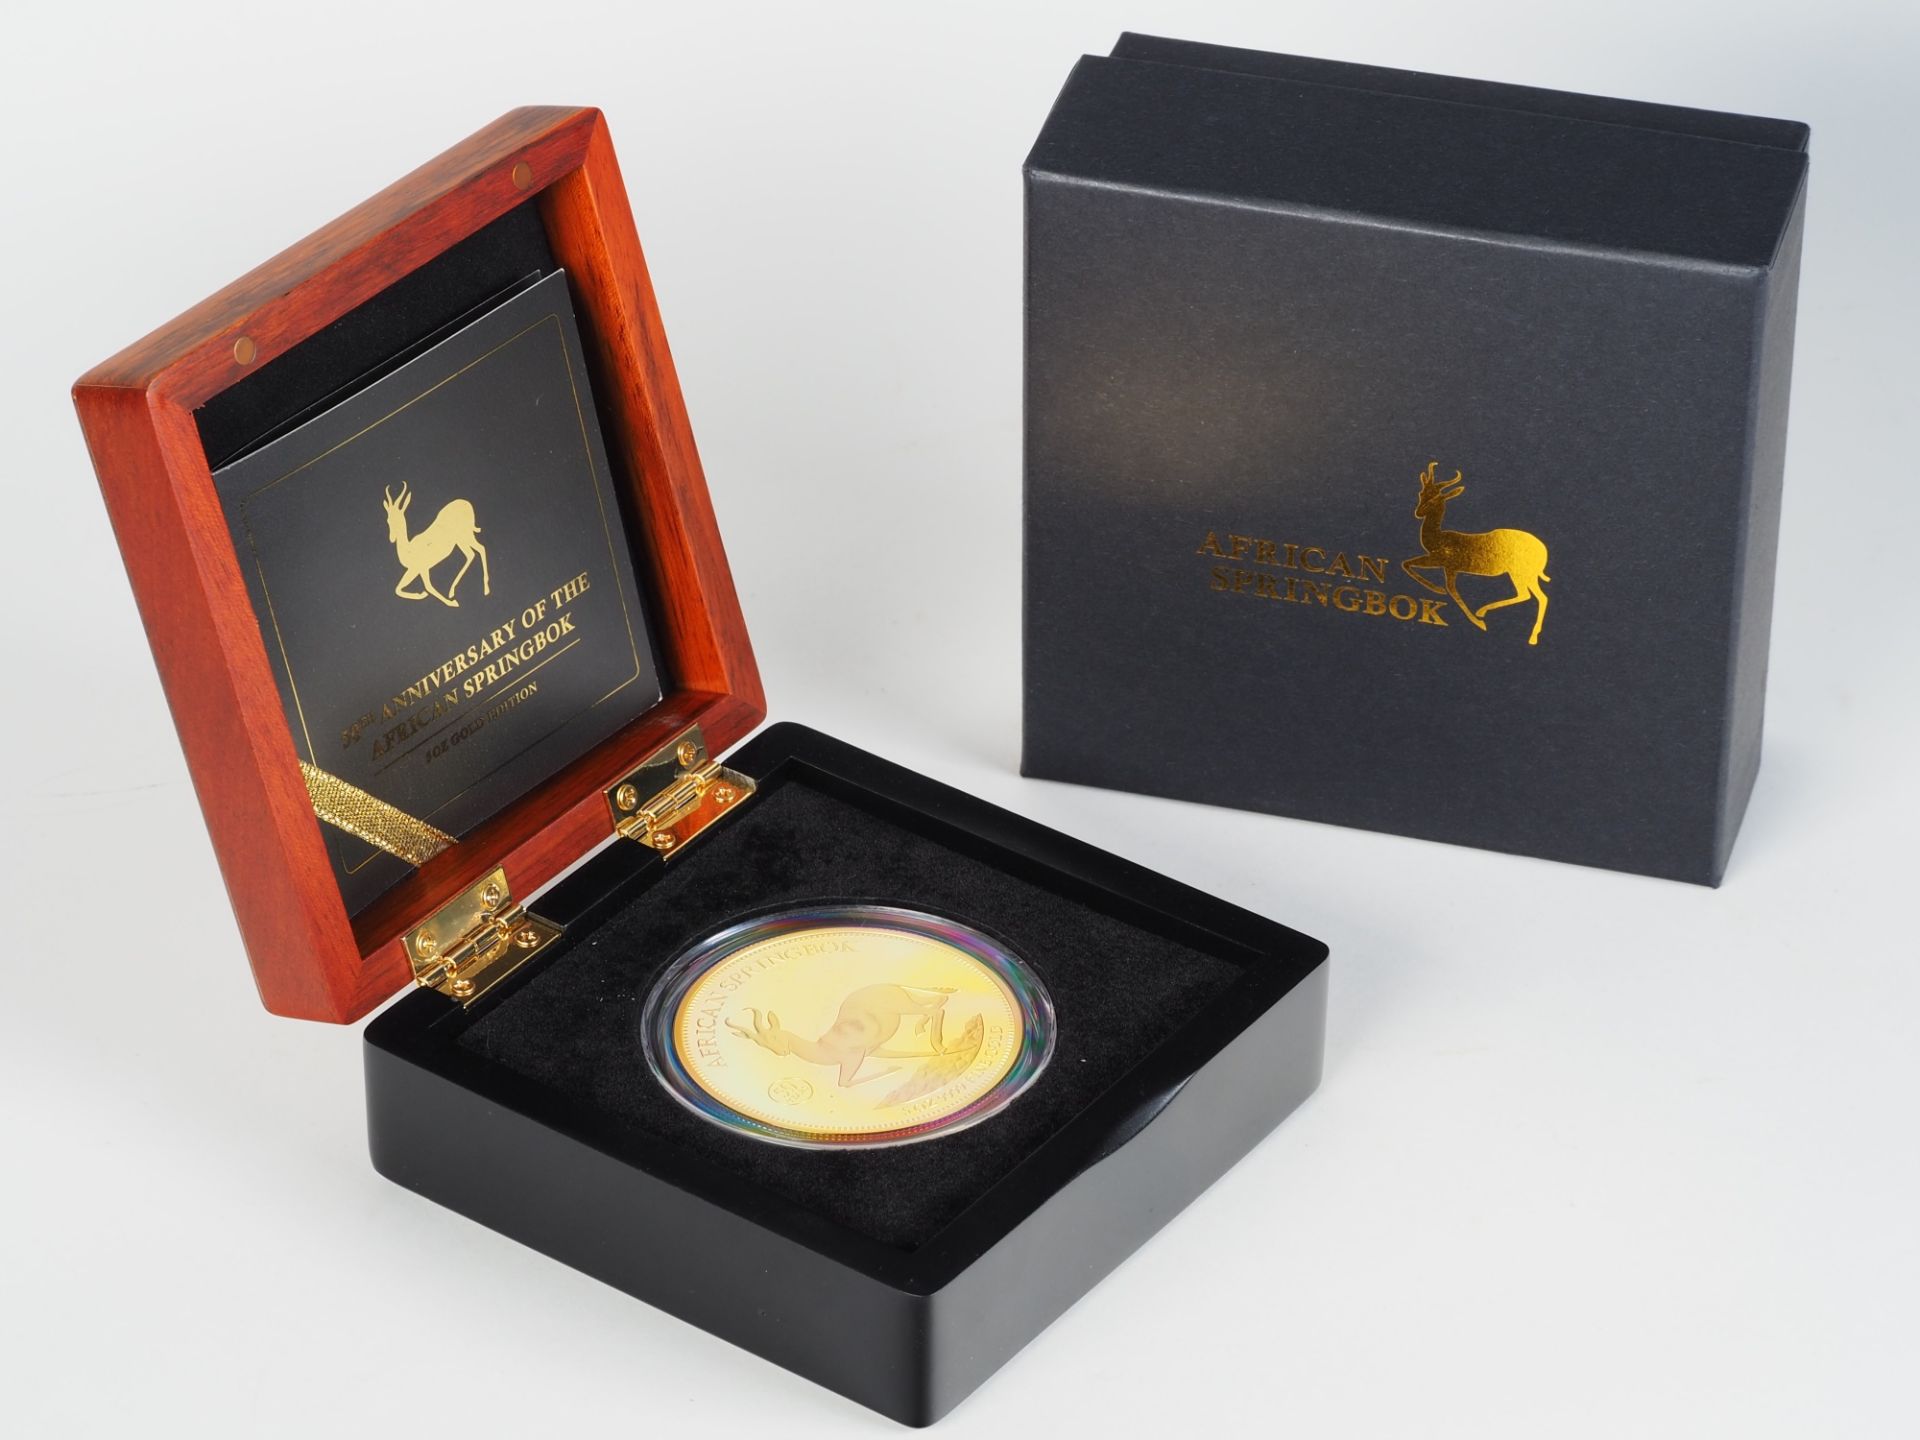 African Springbok 5 oz Gold Coin, Limited Edition - BUYER'S PREMIUM FREE